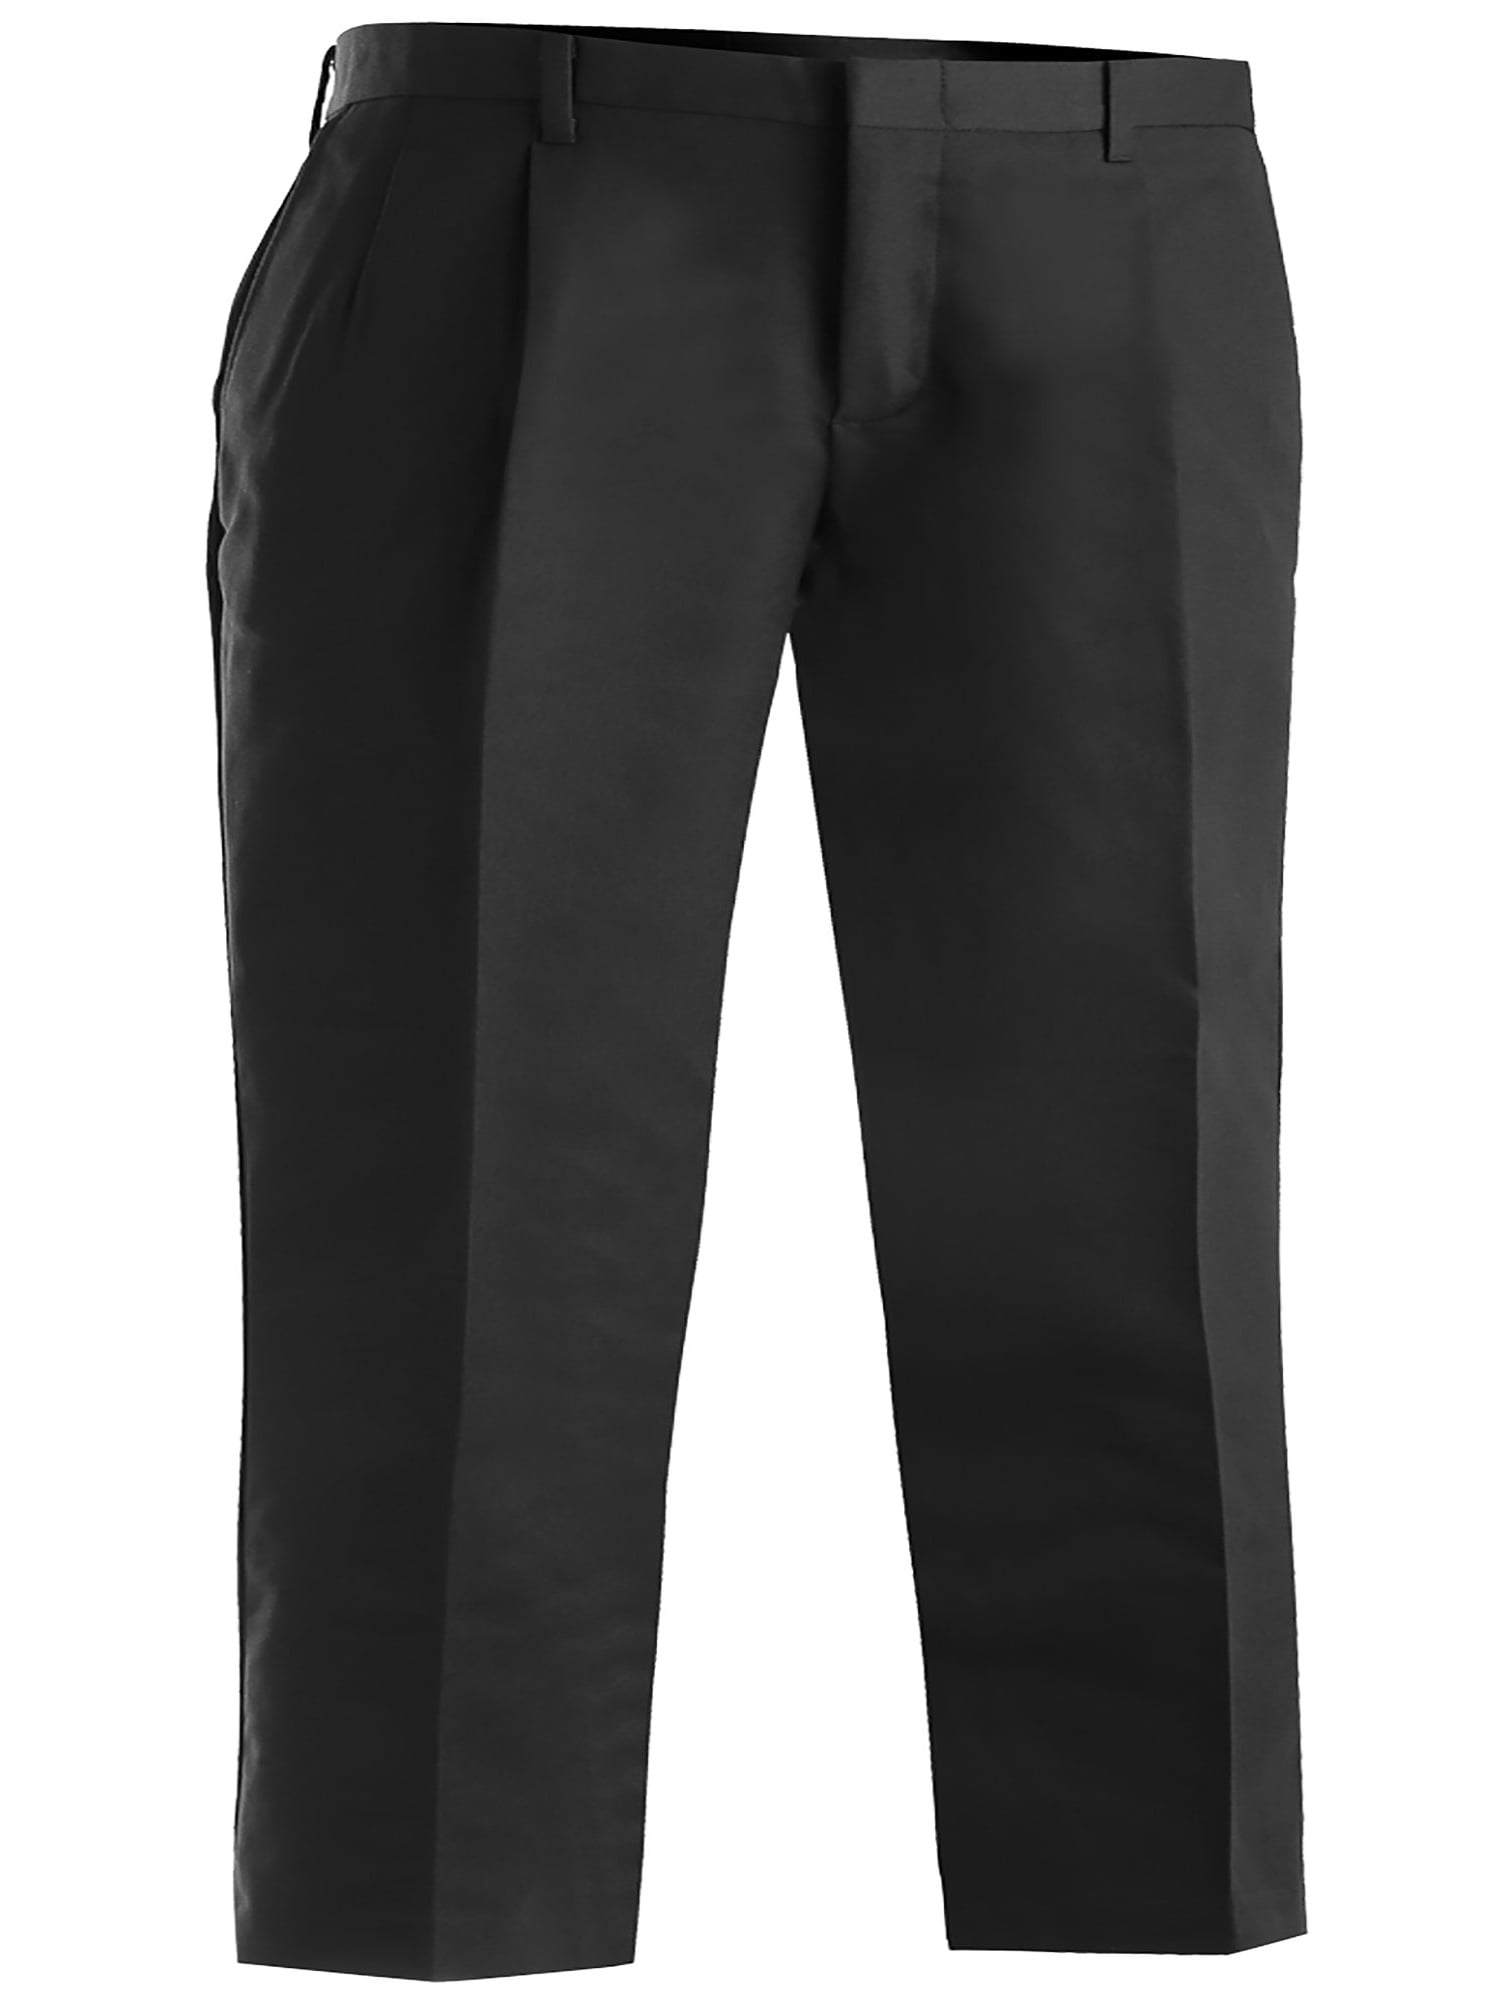 Black Edwards Garment Womens Business Casual Pleated Pant 10 28